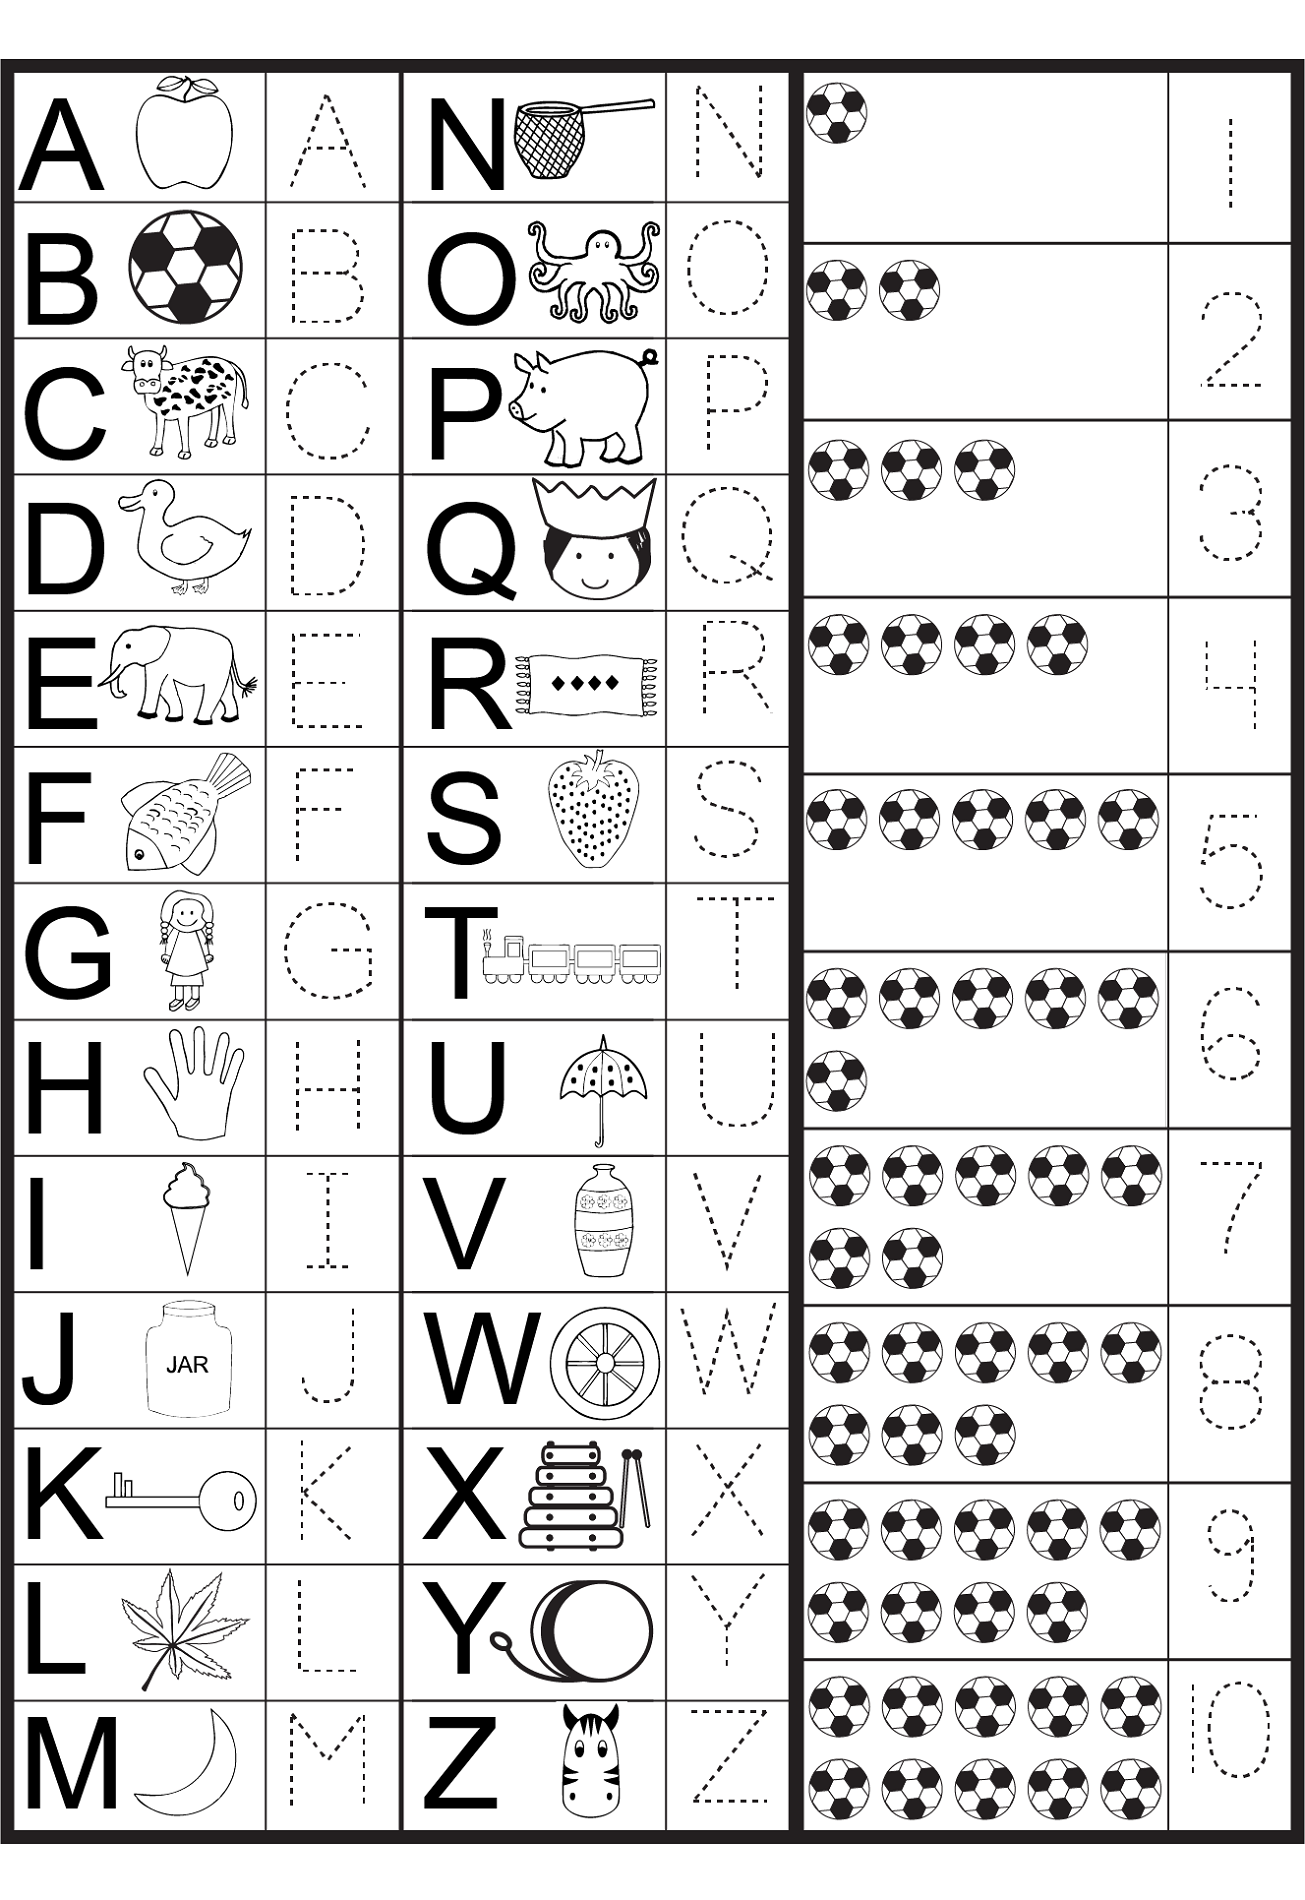 printable-abc-traceable-worksheets-activity-shelter